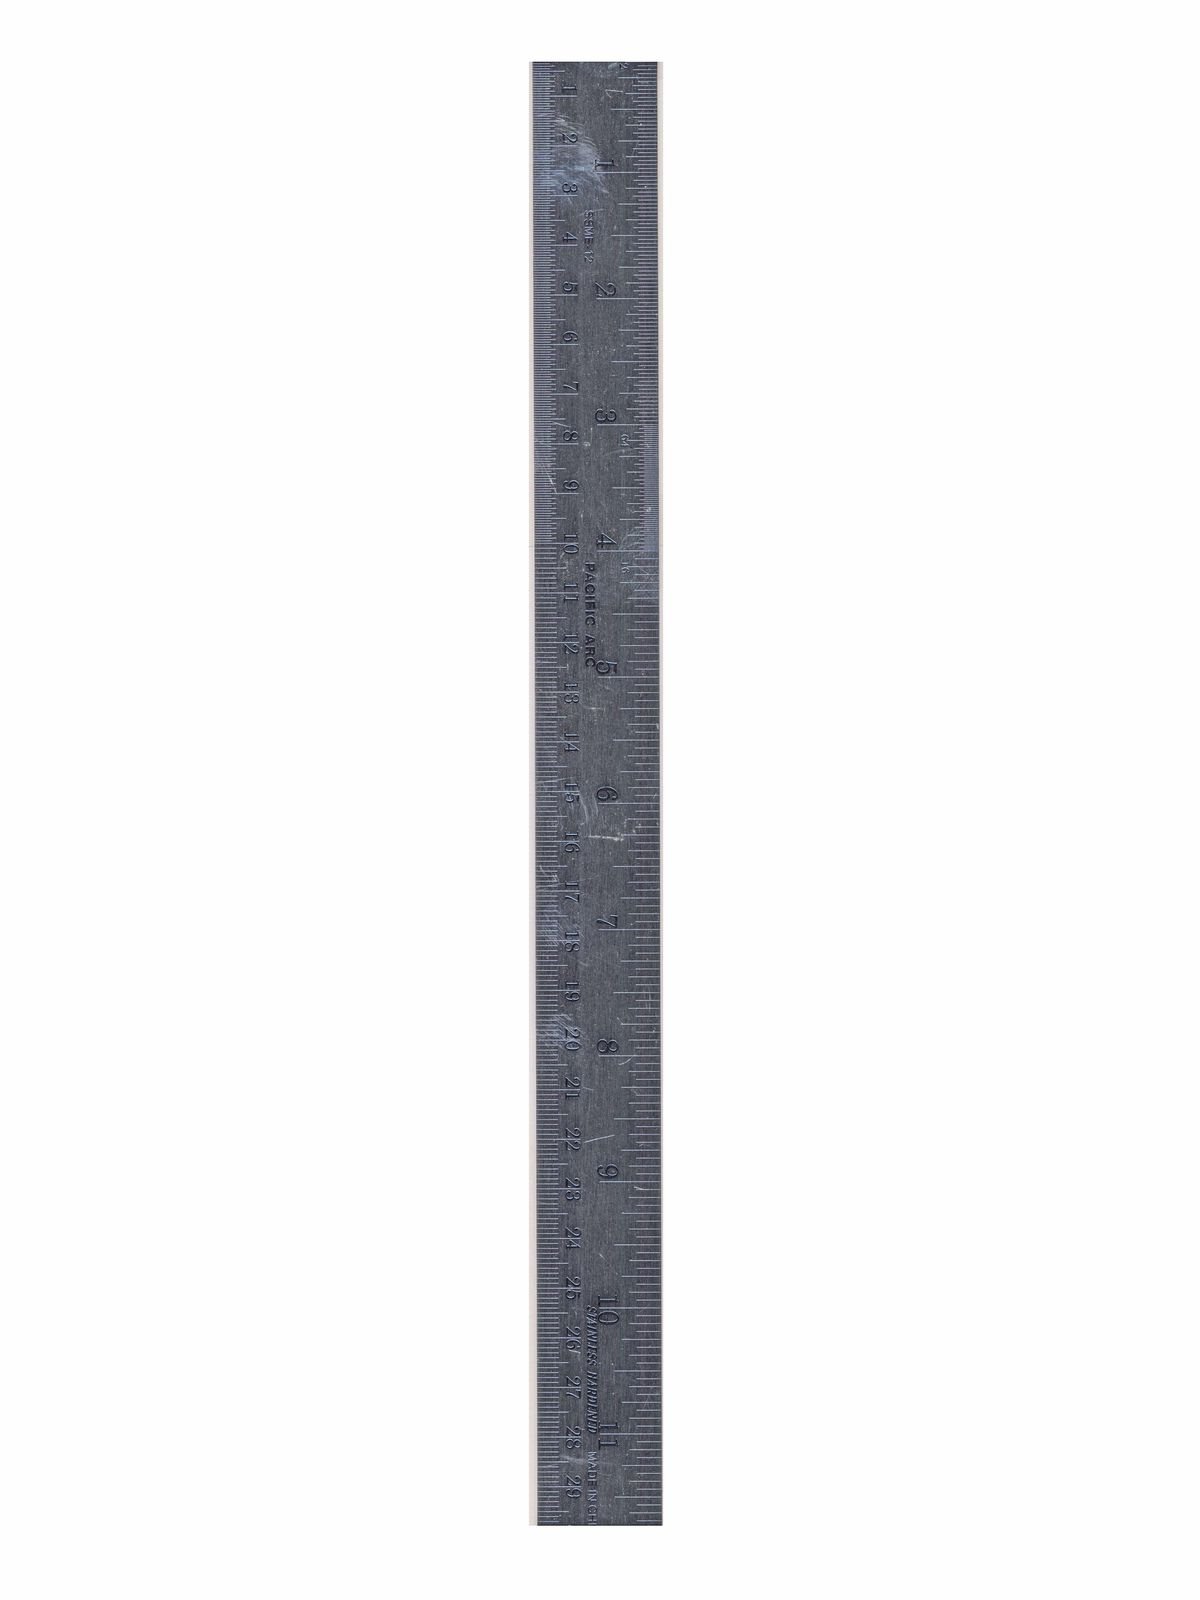 Pacific Arc Stainless Steel Rulers Inch/Metric with Conversion Table 6 in. 